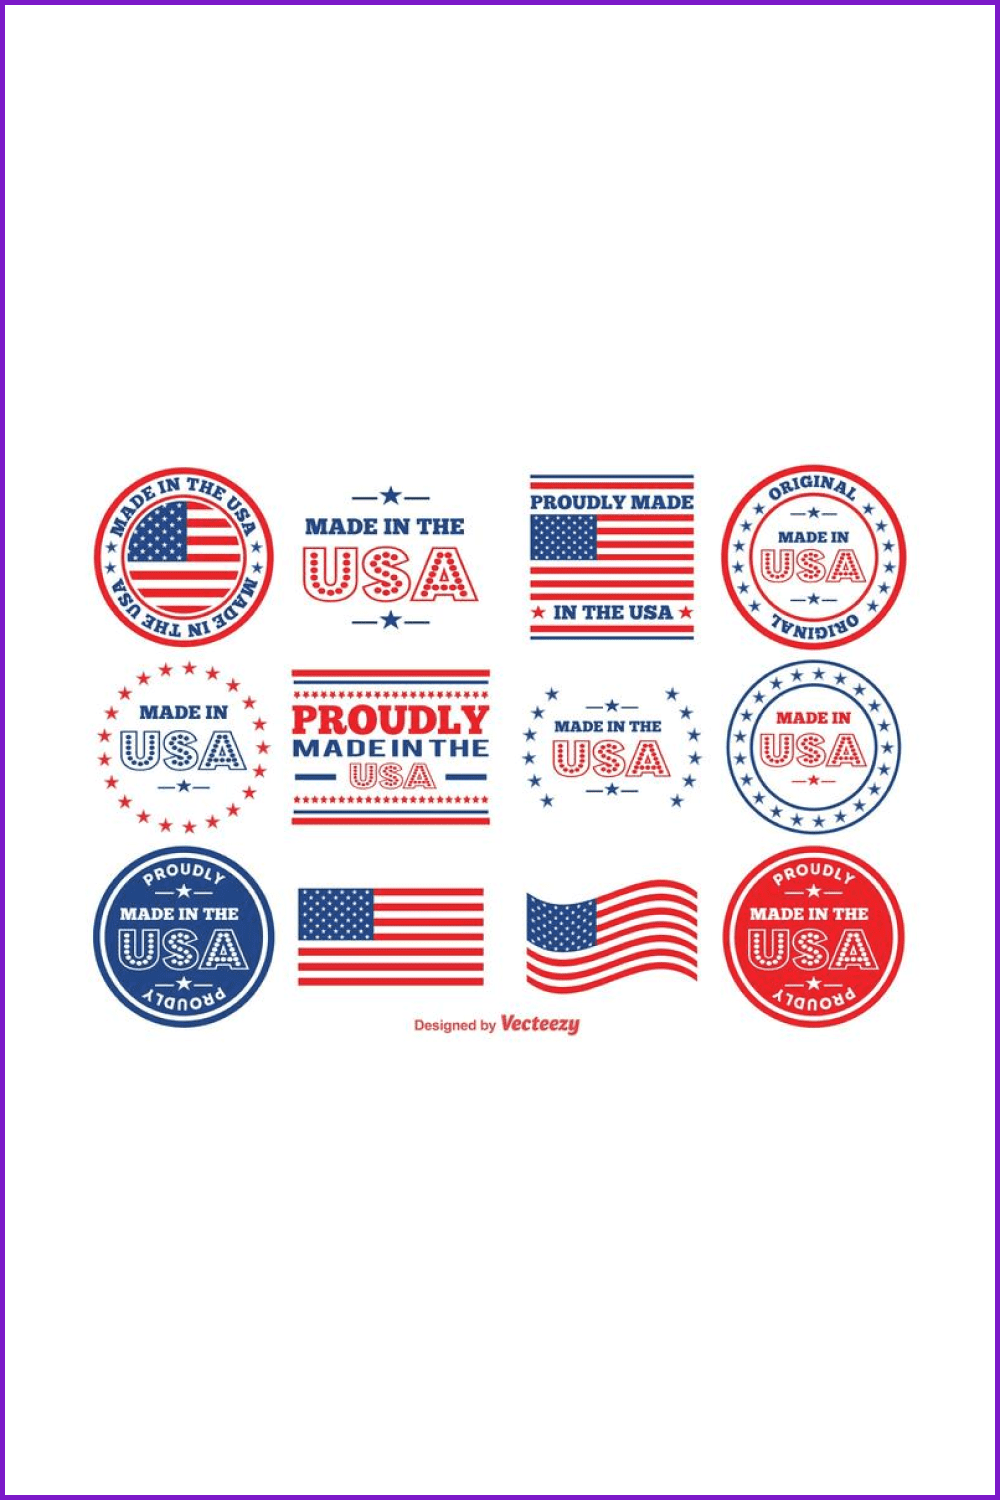 Made in the USA Vector Stamps.